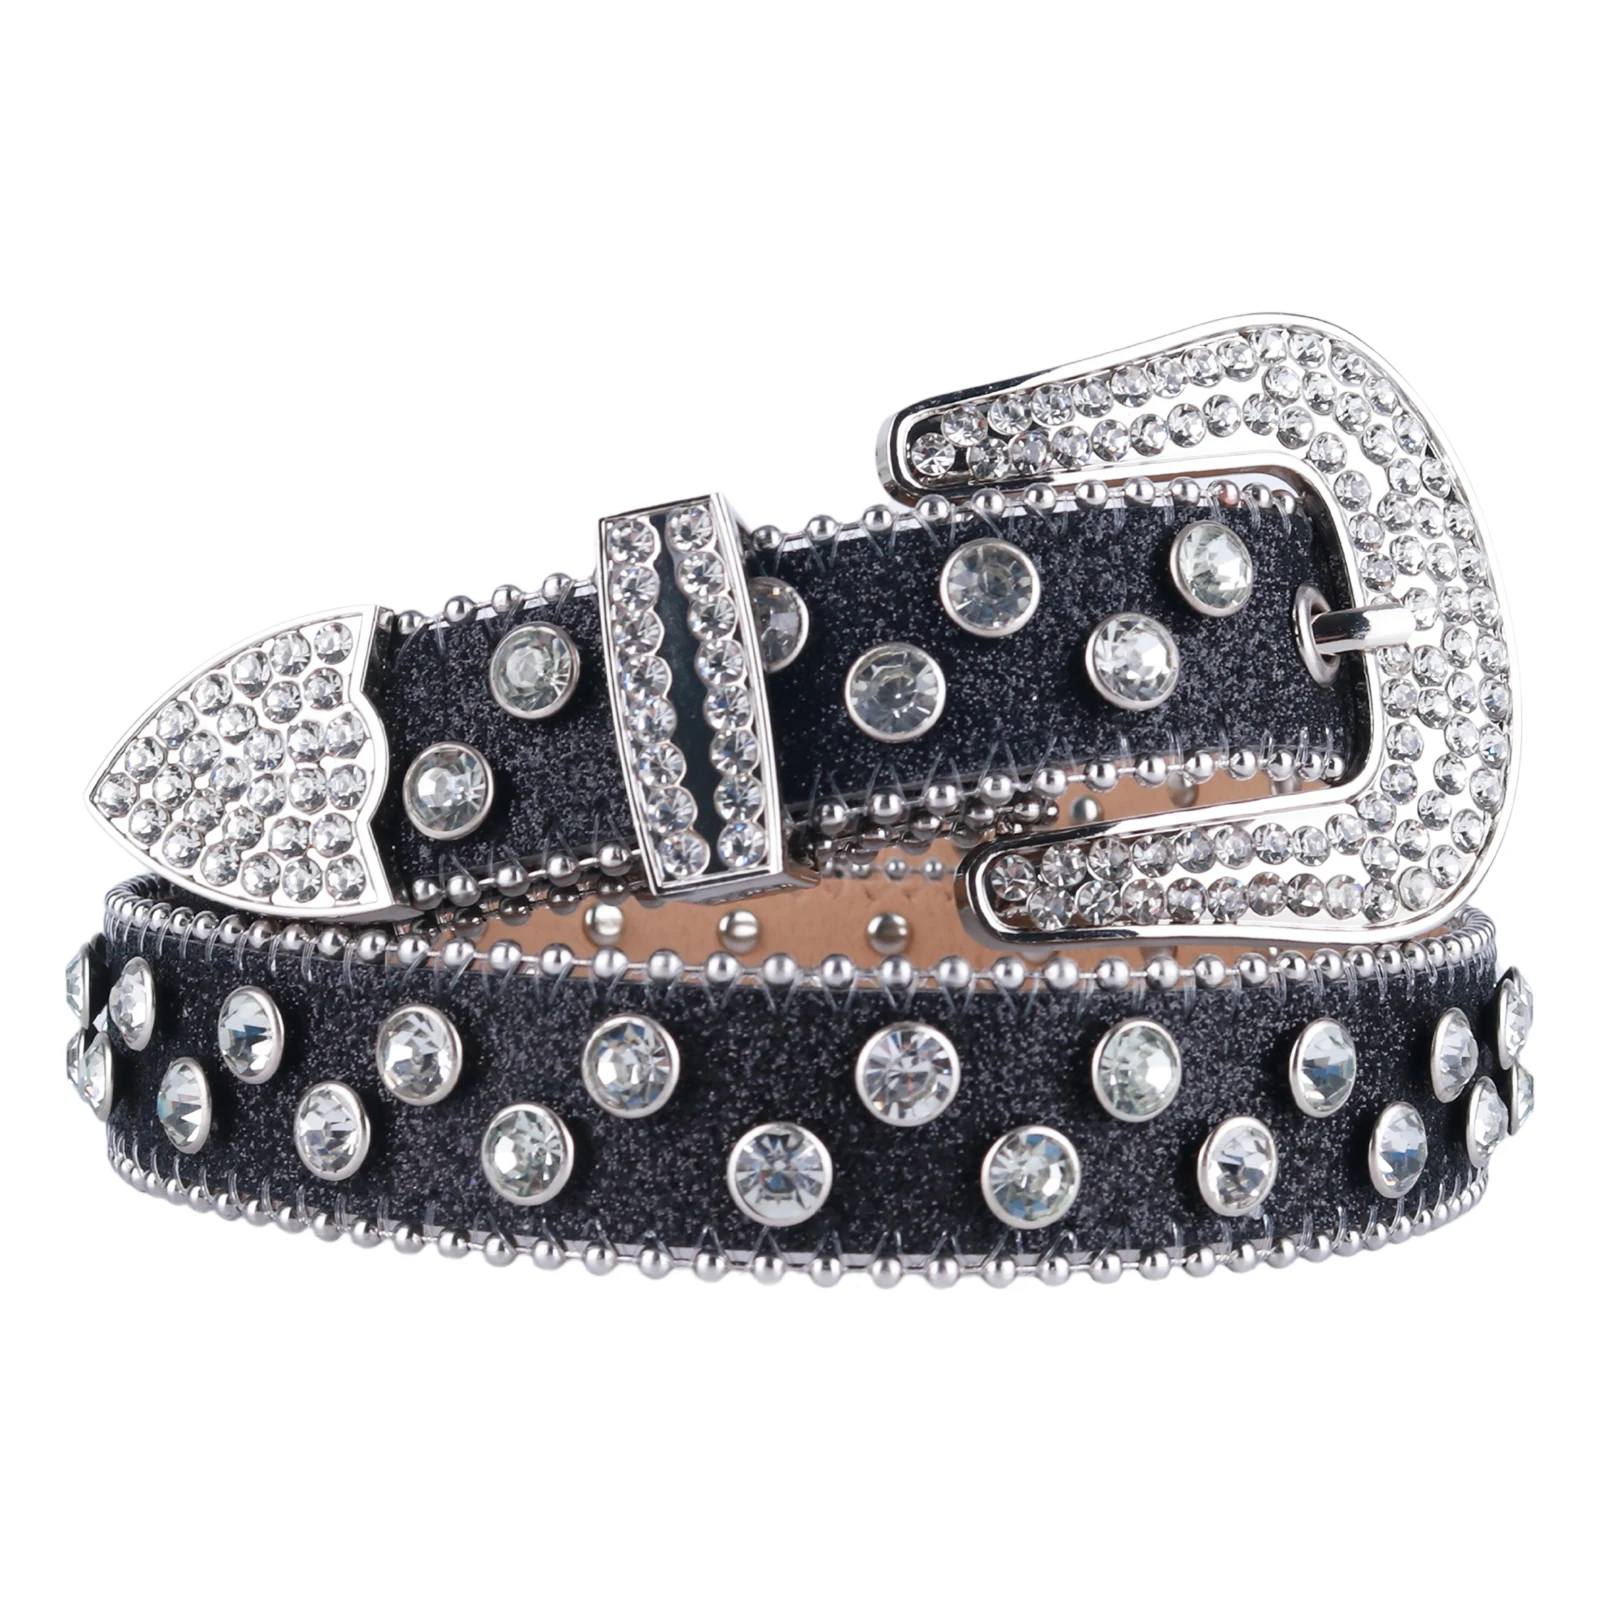 Punk Cowboy Cowgirl Western Rhinestones Belts For Women Man High Quality Bling Bling Diamond Crystal Studded Belt For Jeans